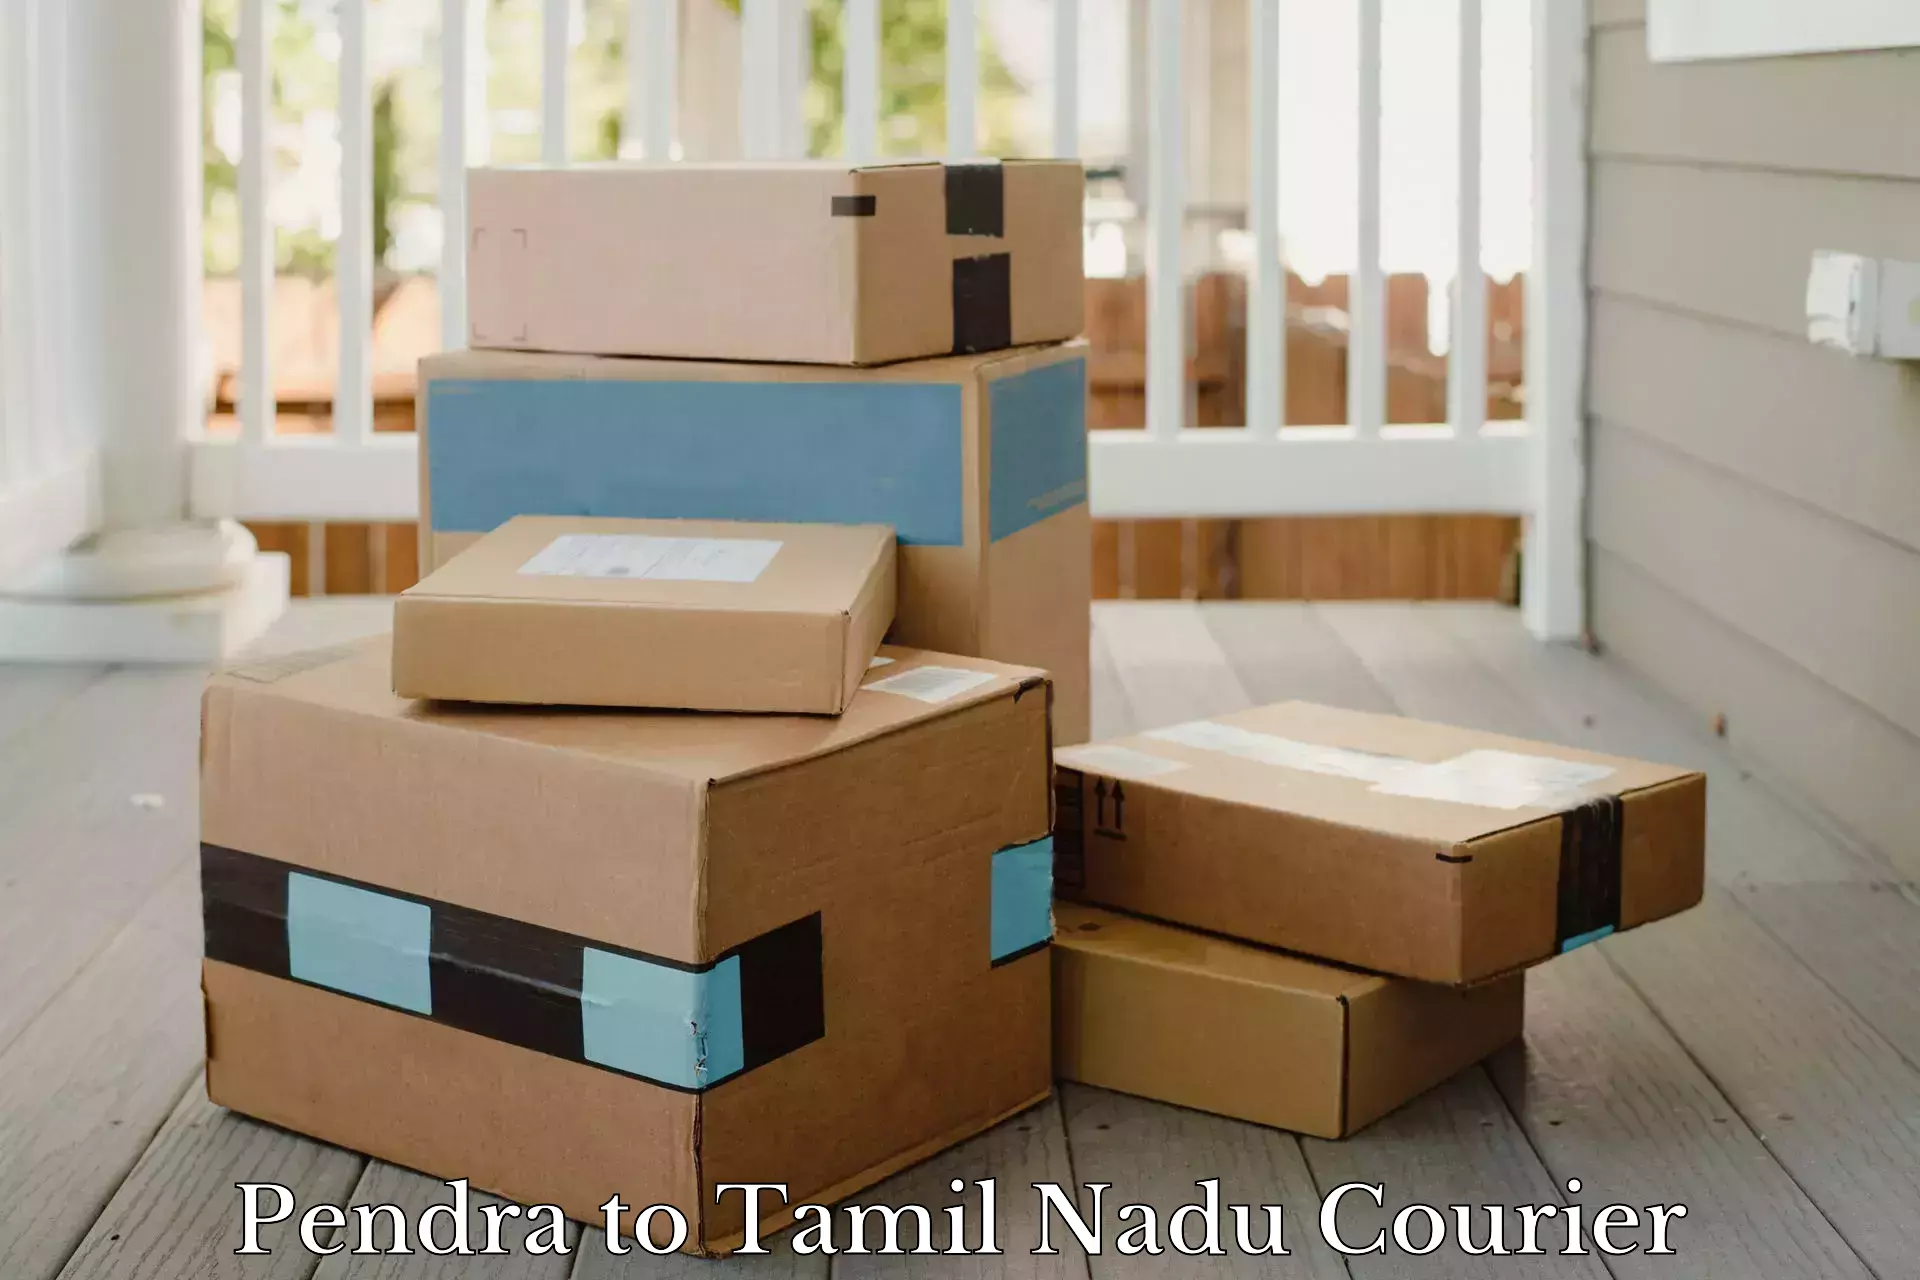 Courier service booking Pendra to Omalur